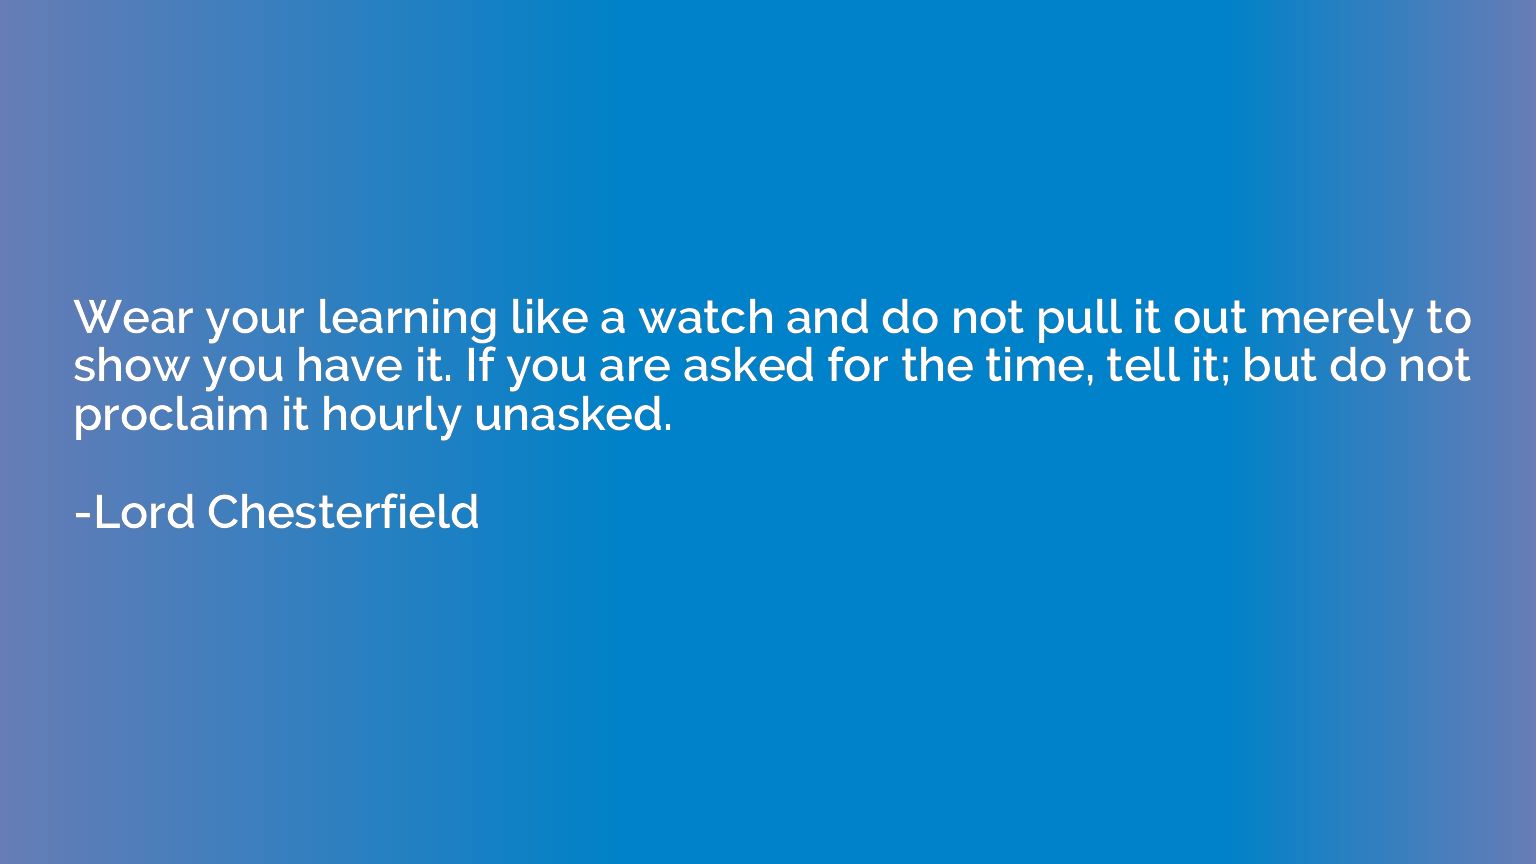 Wear your learning like a watch and do not pull it out merel